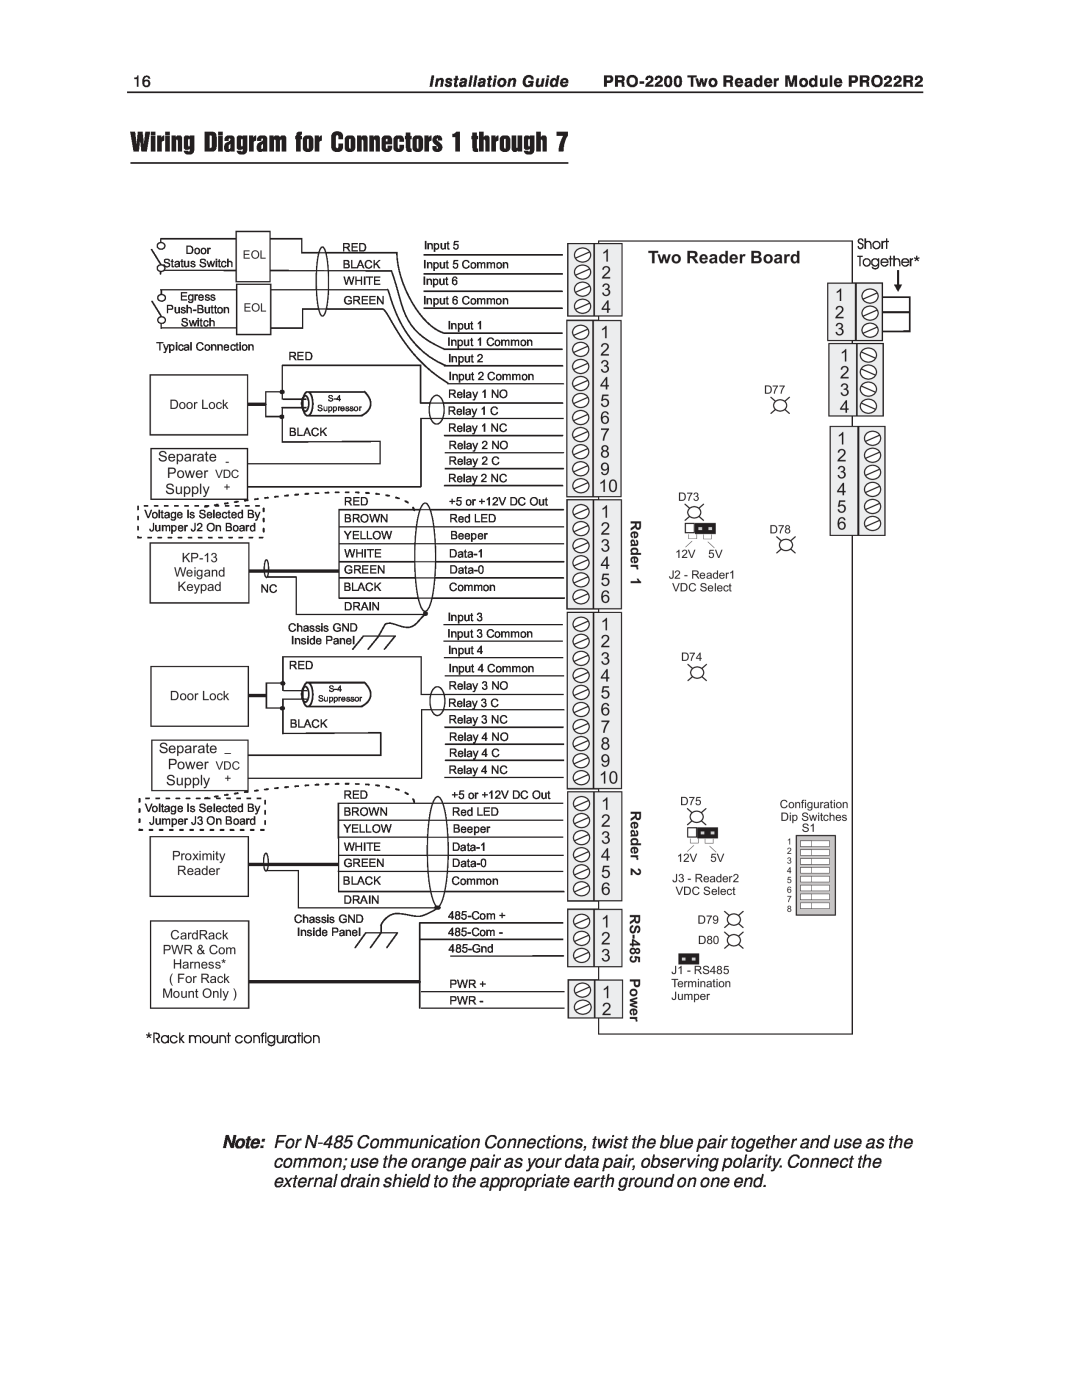 Honeywell PRO-2200 Wiring Diagram for Connectors 1 through, 1 2 3 4 1 2 3 4 5 6 7 8 9 1 2 3, Two Reader Board, Separate 